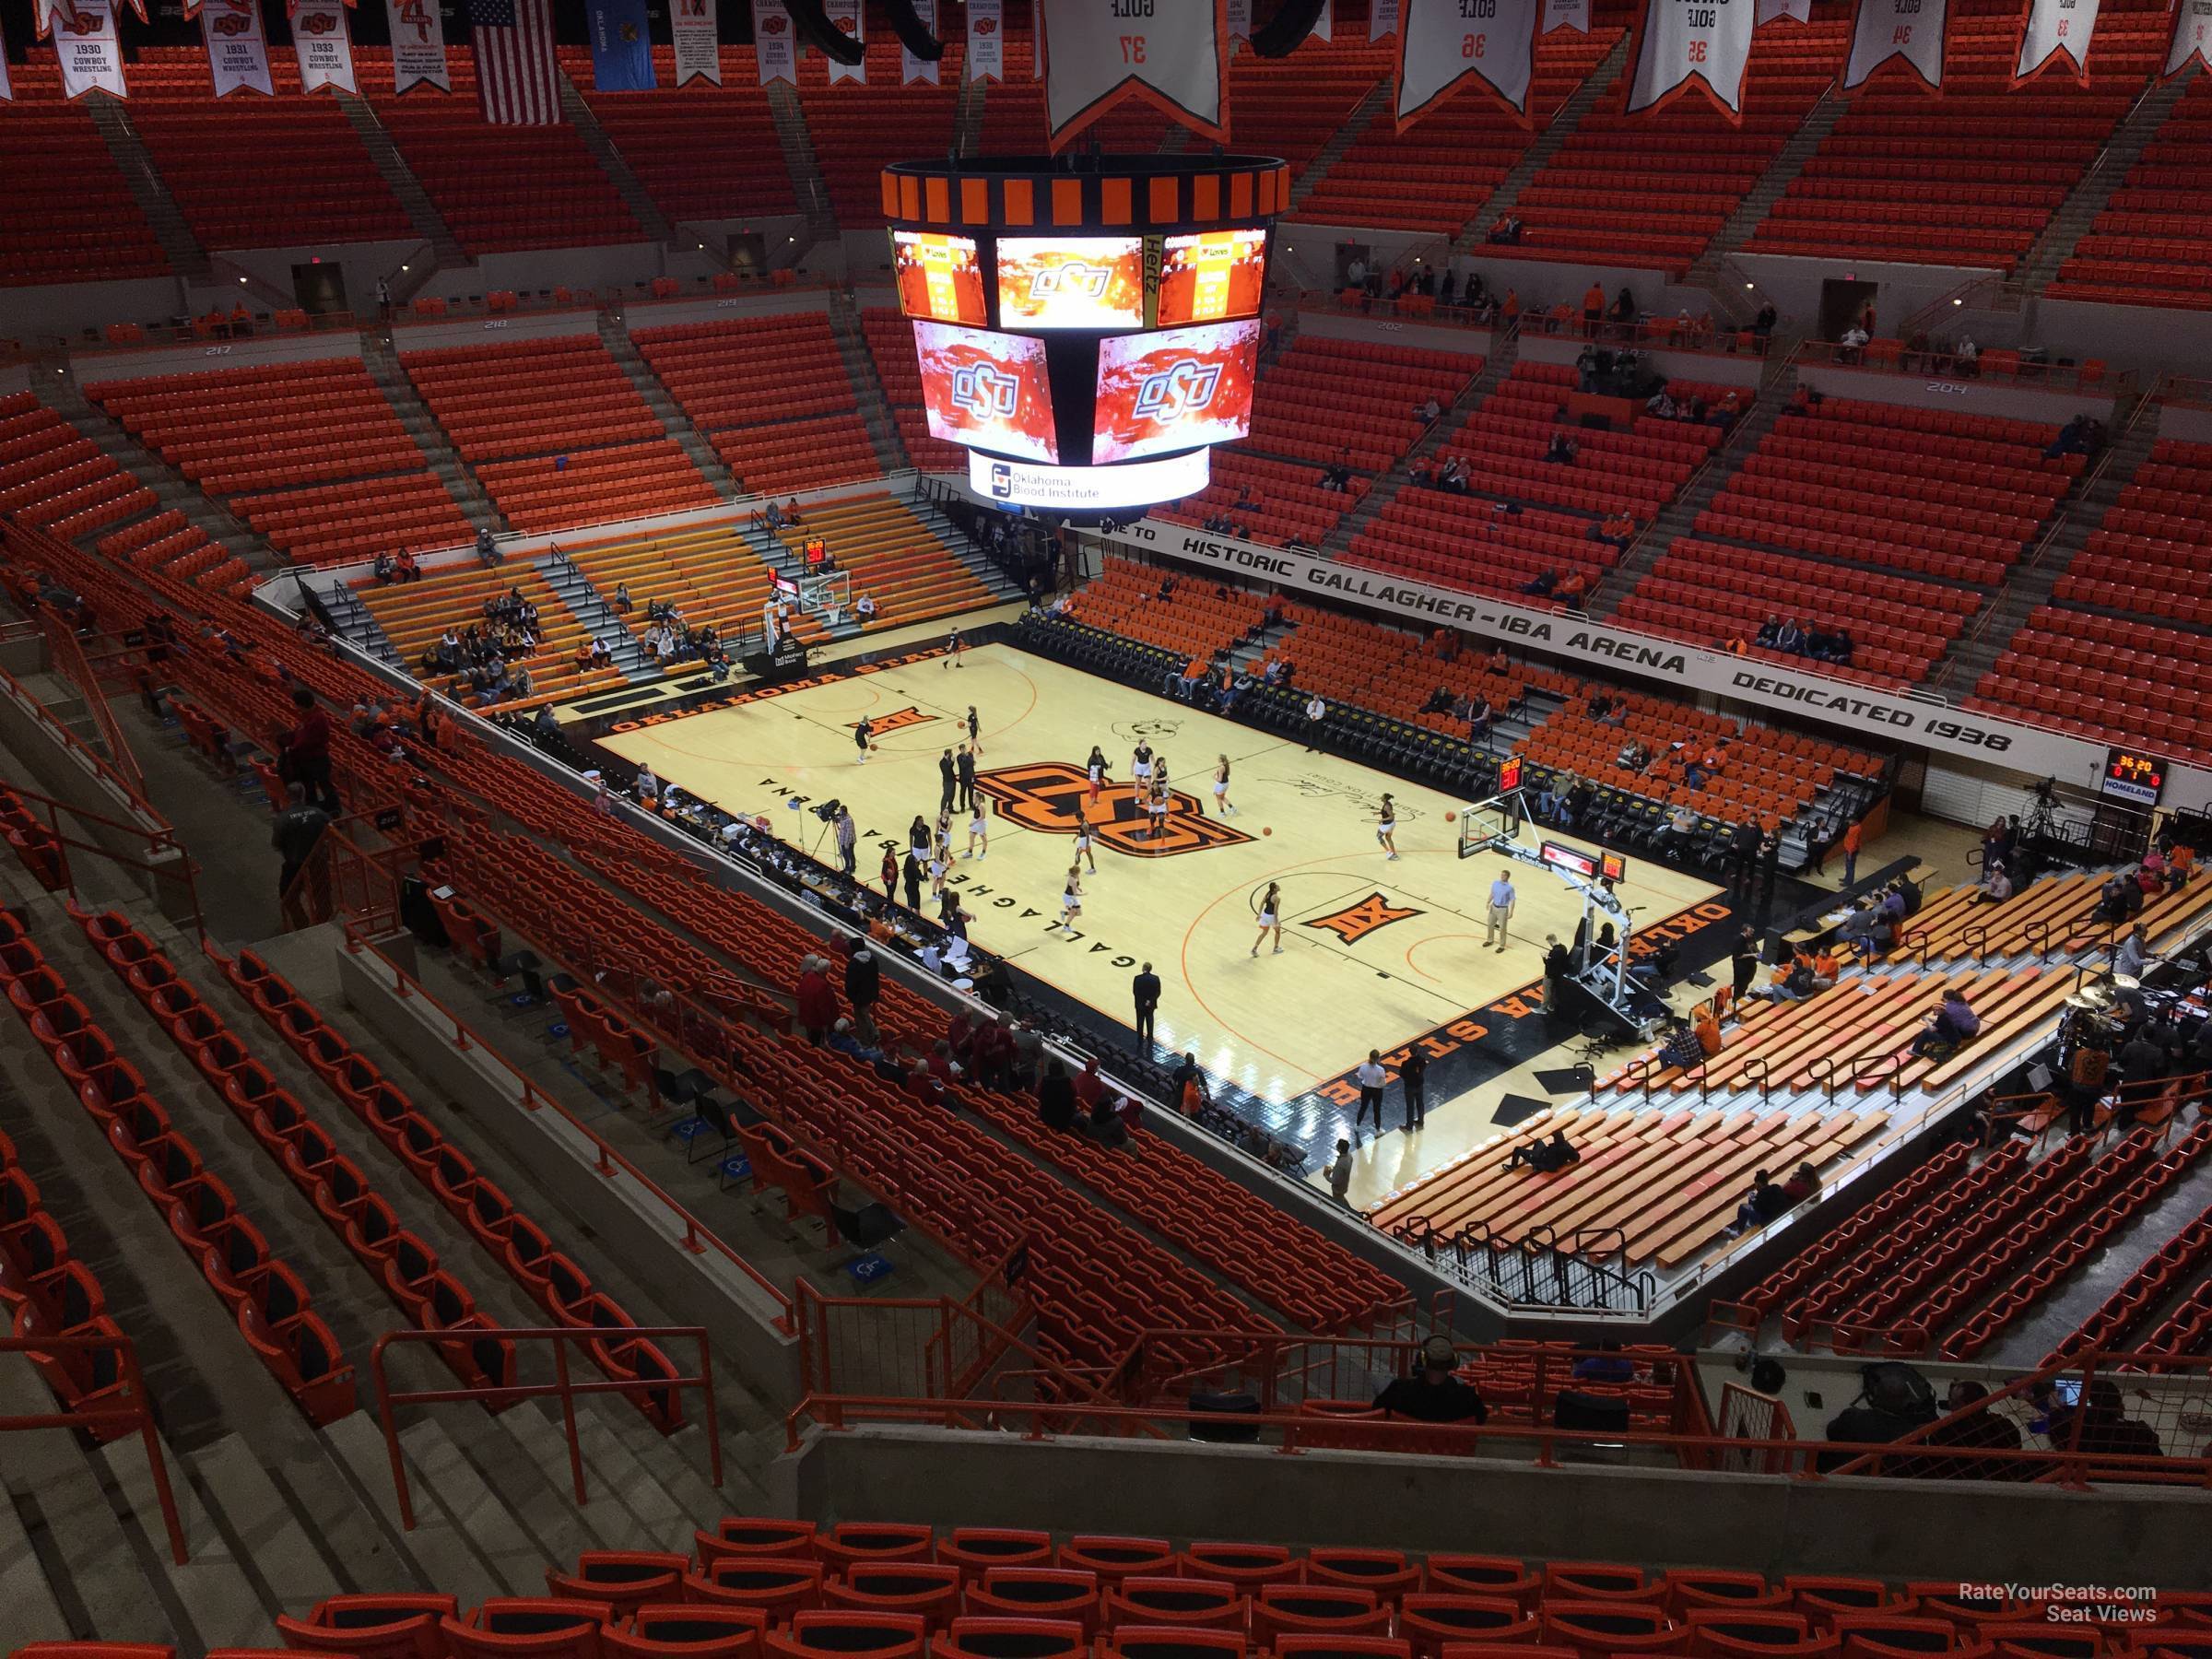 section 314, row 10 seat view  - gallagher-iba arena